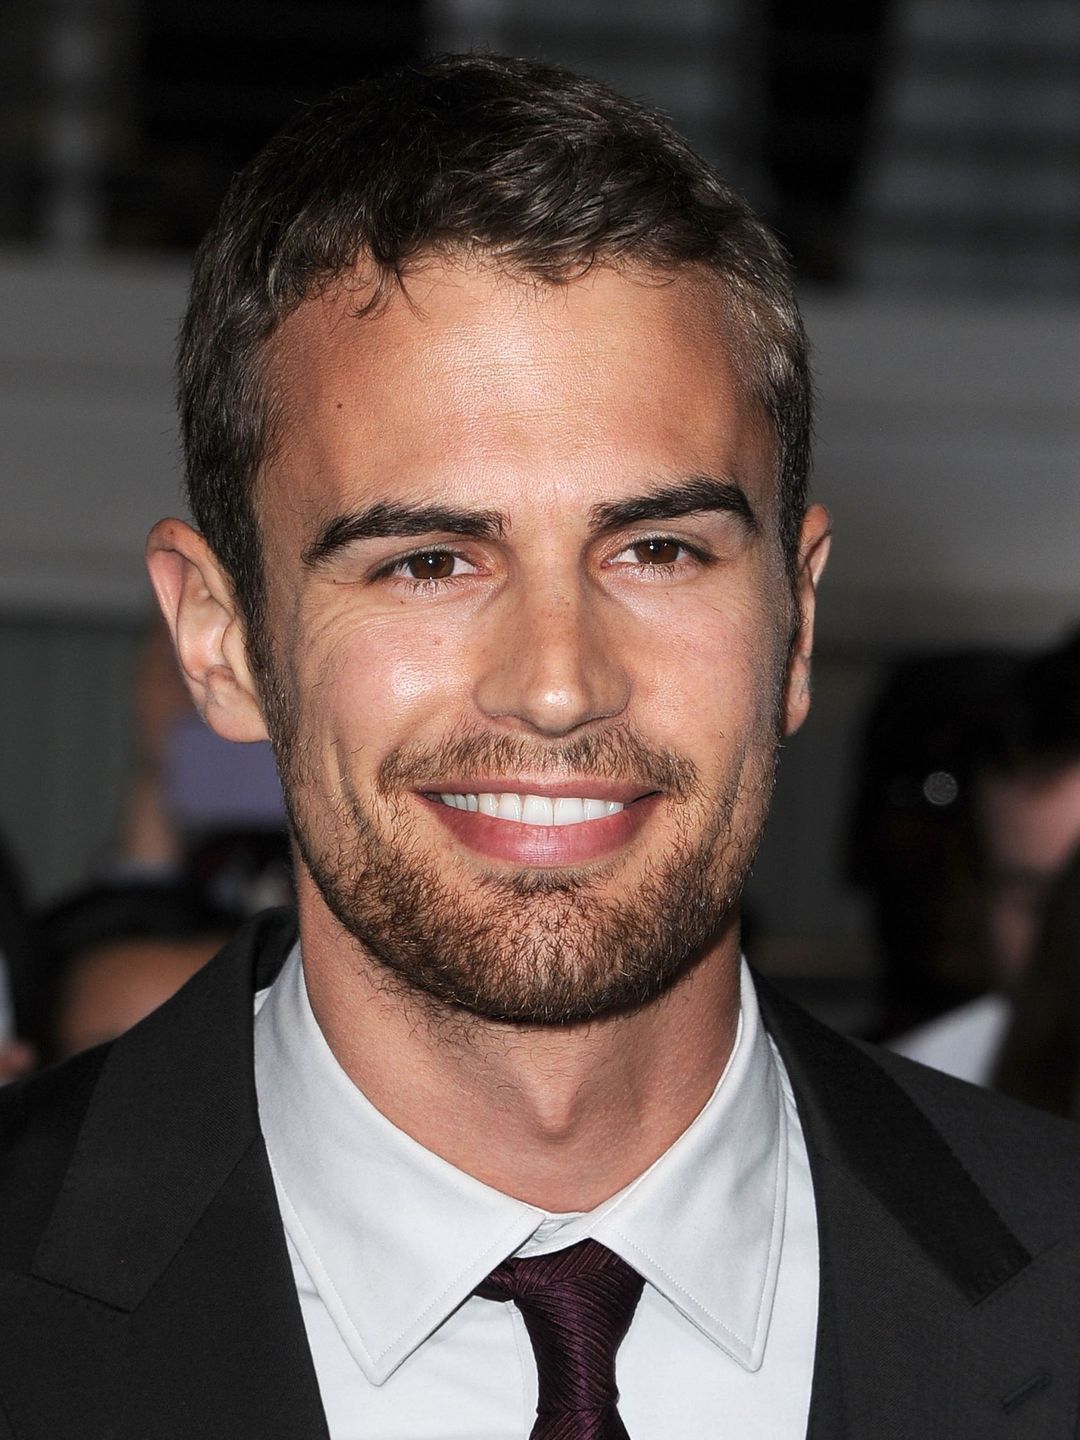 Theo James young age